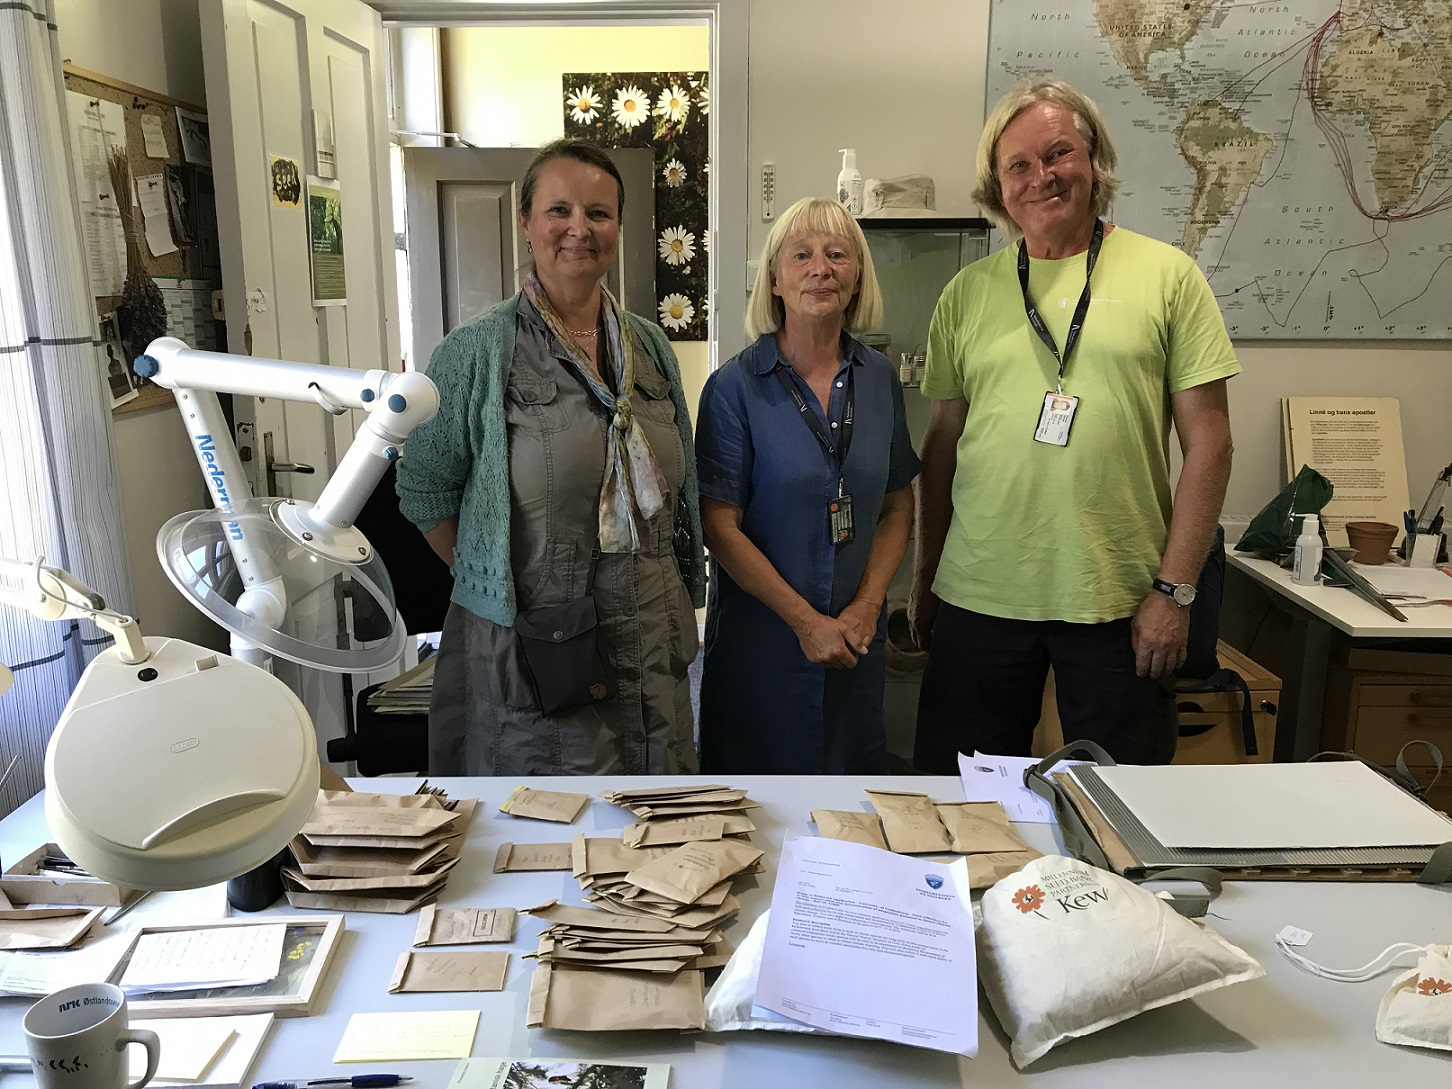 3 people standing in a row smiling behind a work bench. The work bench has a variety of paper envelopes and cloth bags on it along with a stack of herbarium specimens